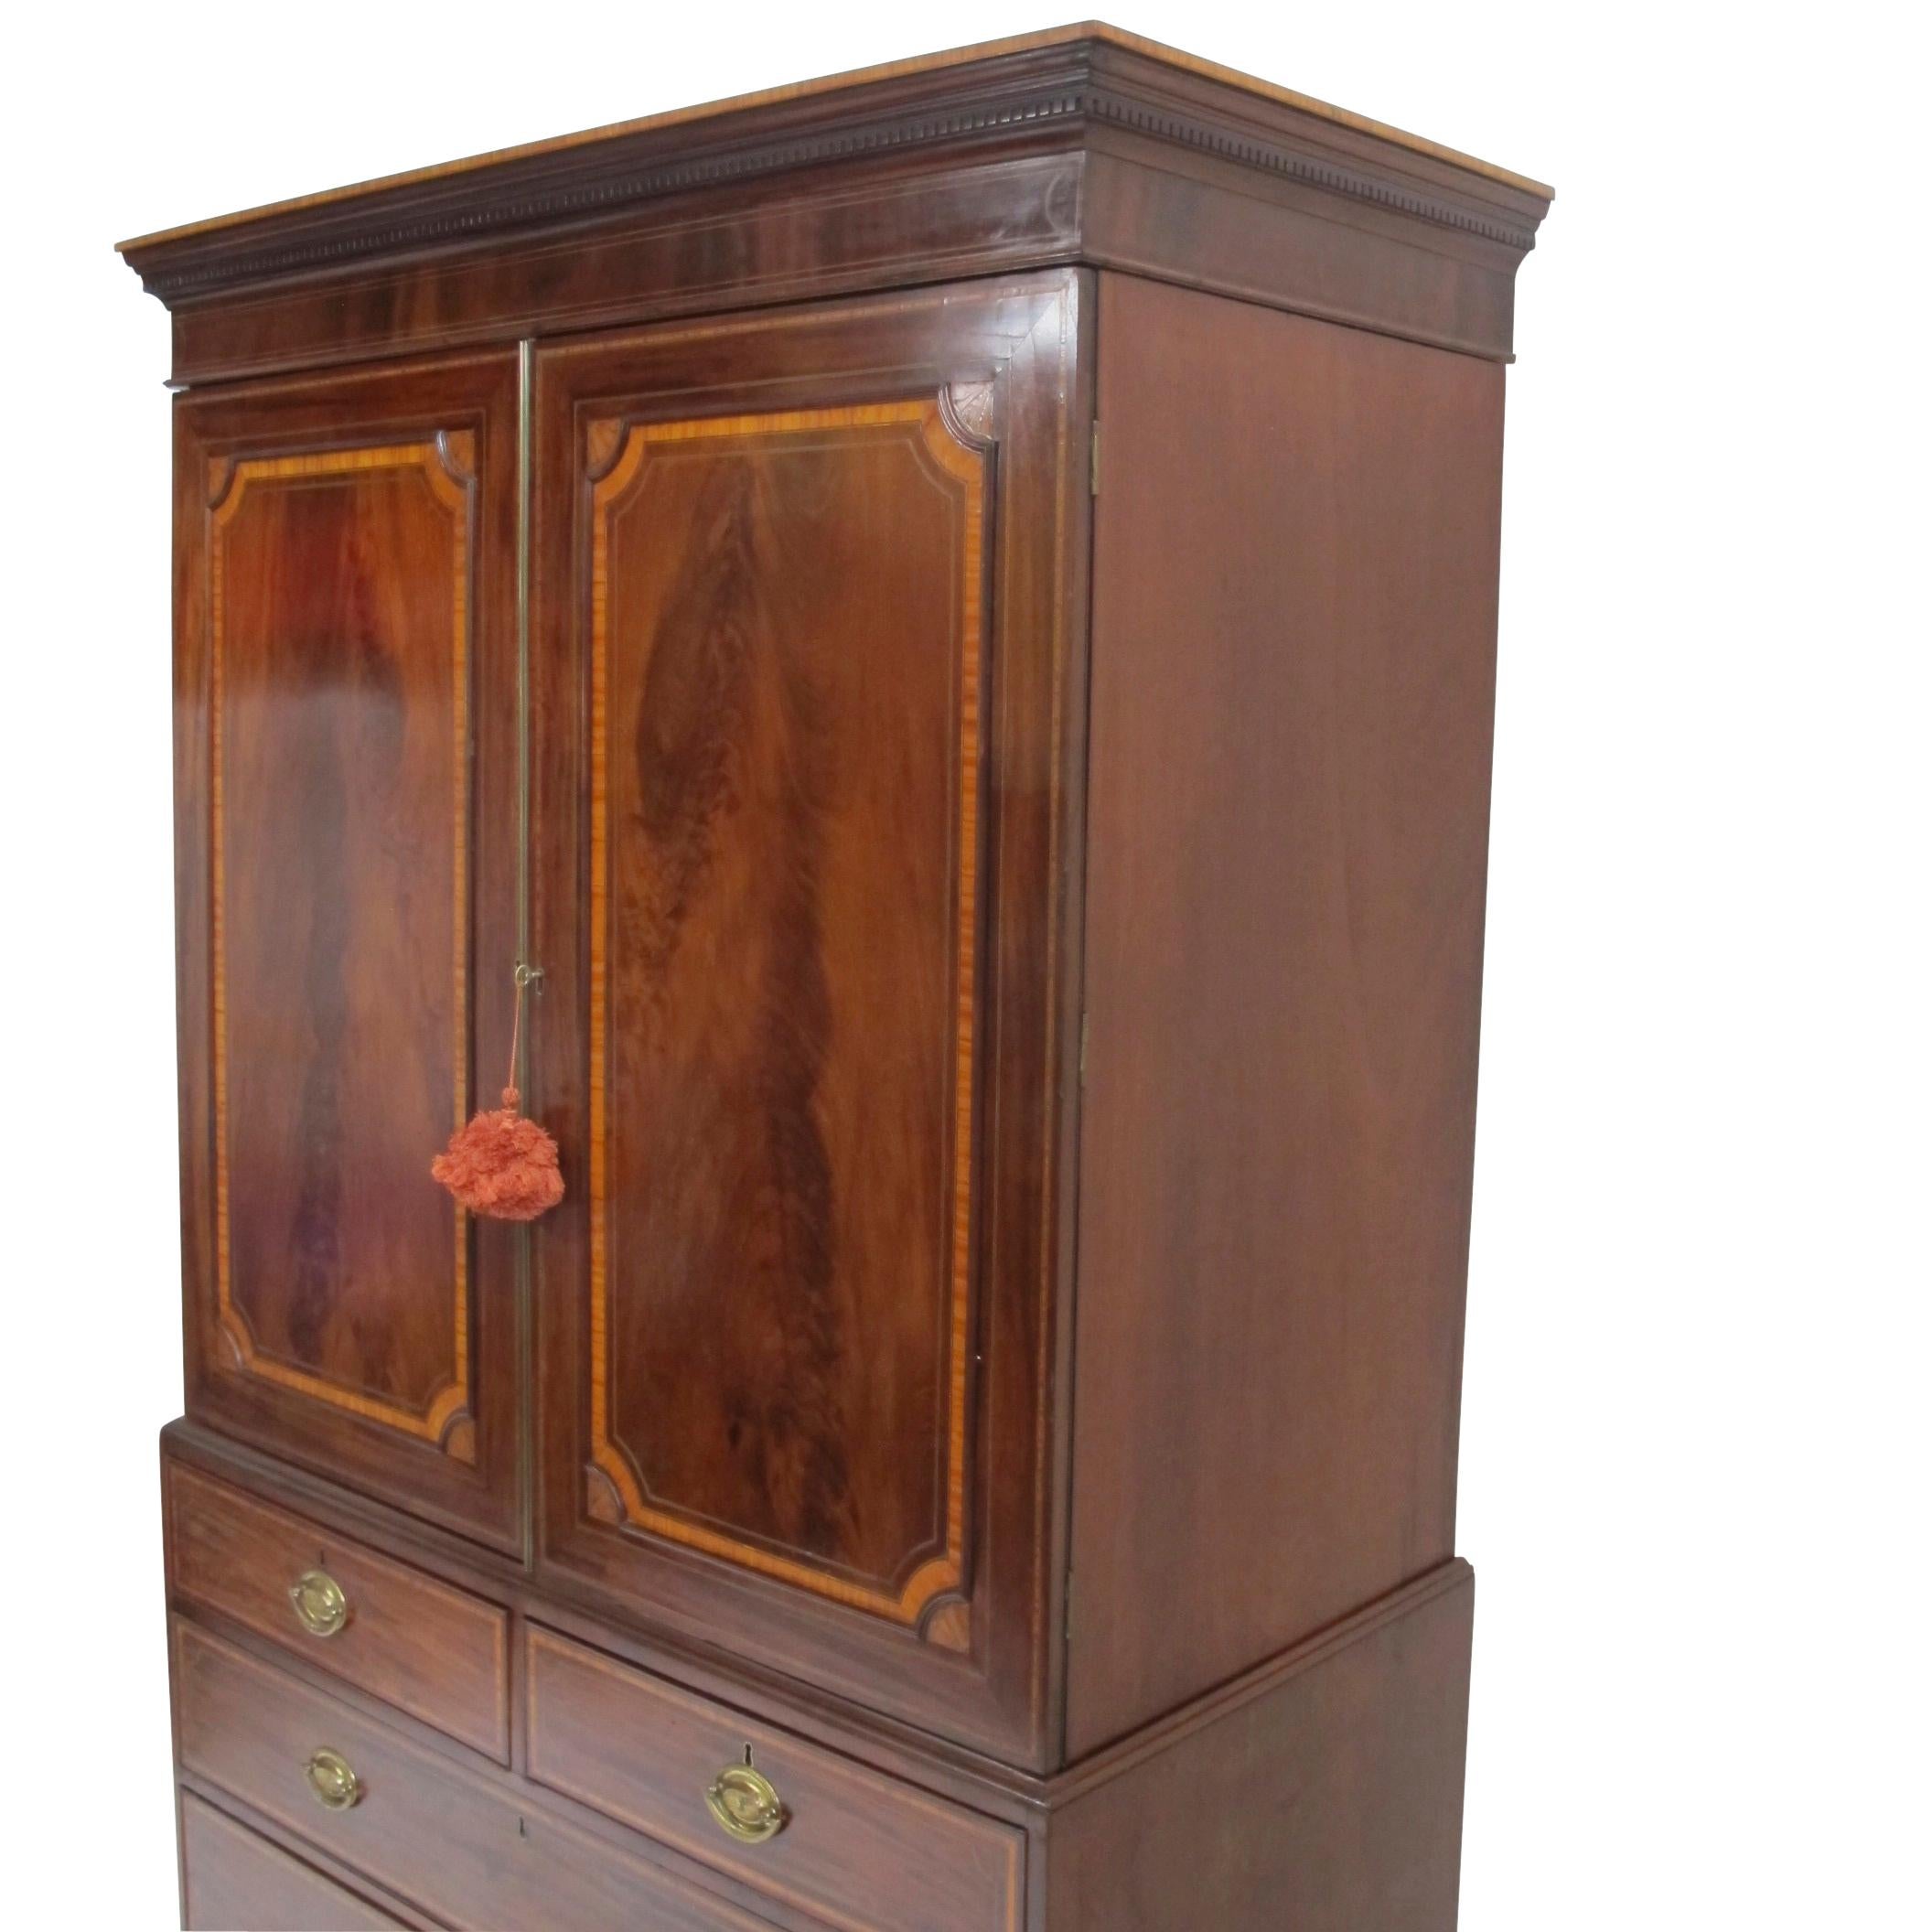 Mahogany linen press with recessed panelled doors trimmed with satinwood banding and shell shape corner medallions. The doors opening to reveal five full width open drawers, the top sitting above two shot drawers over two long drawers with matching